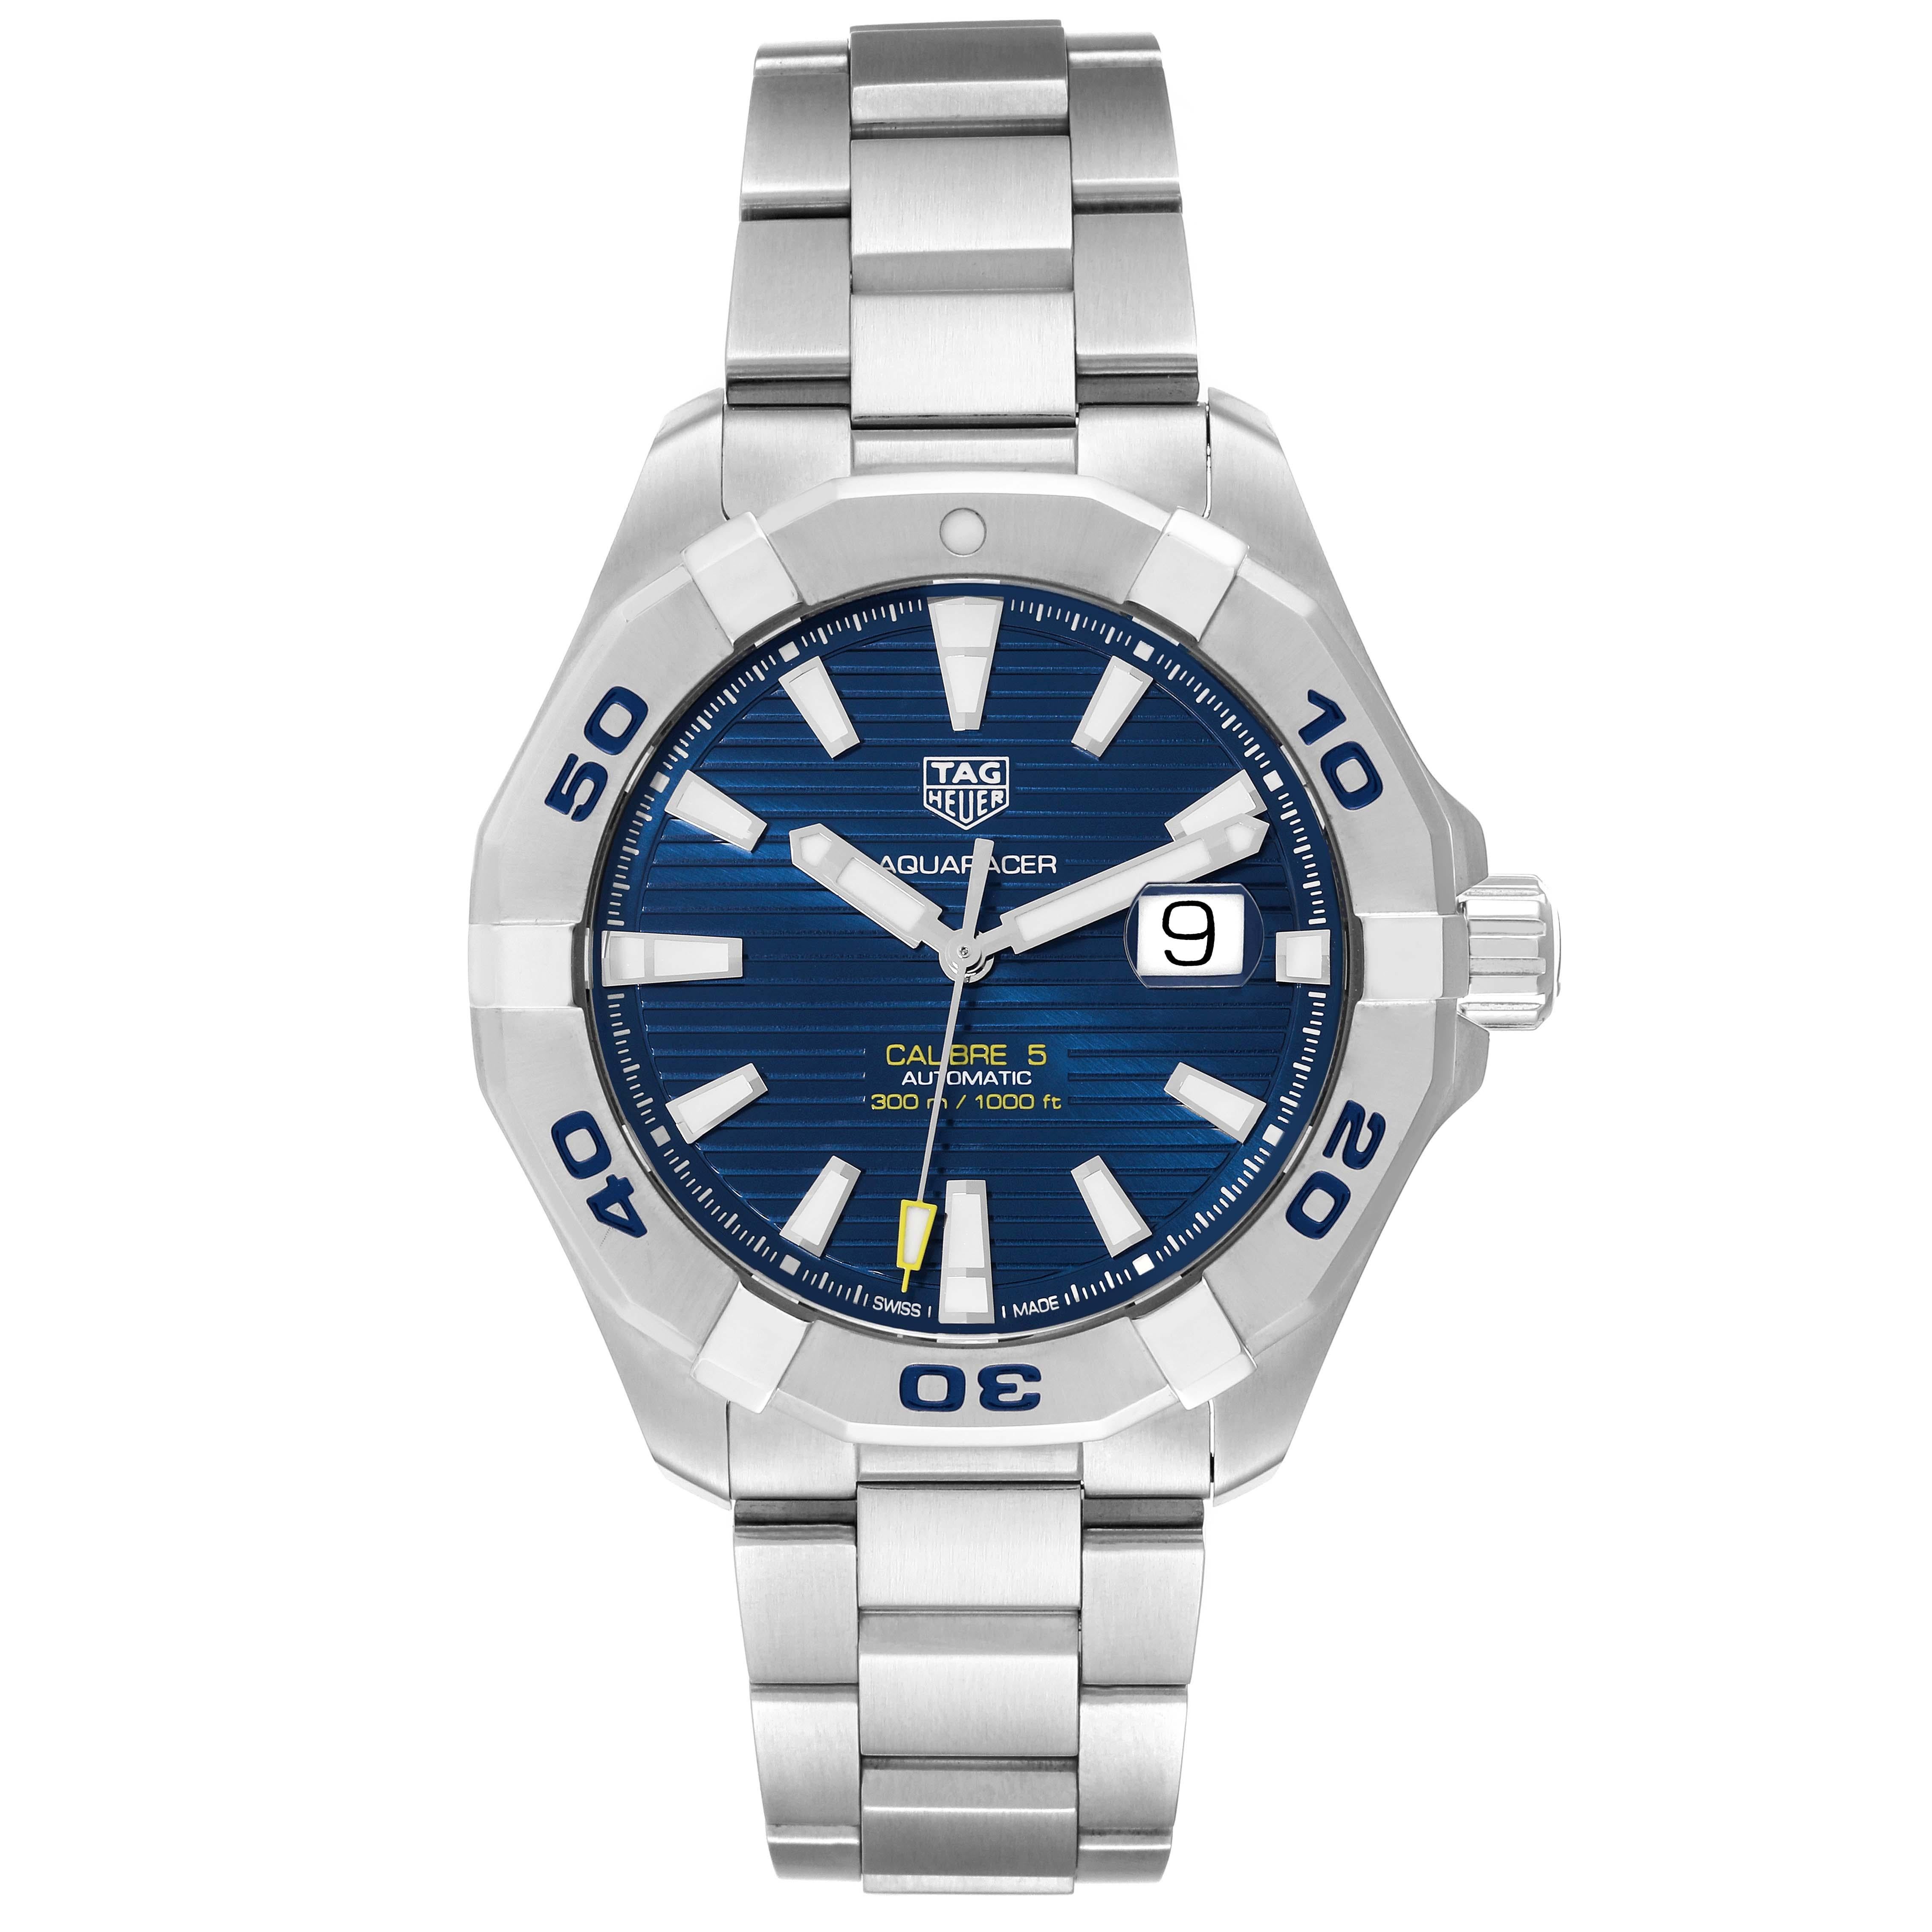 Tag Heuer Aquaracer Blue Dial Steel Mens Watch WAY2012 Box Card. Automatic self-winding movement. Stainless steel case 43.0 mm in diameter. Stainless steel unidirectional rotating bezel. Scratch resistant sapphire crystal with cyclops magnifier.